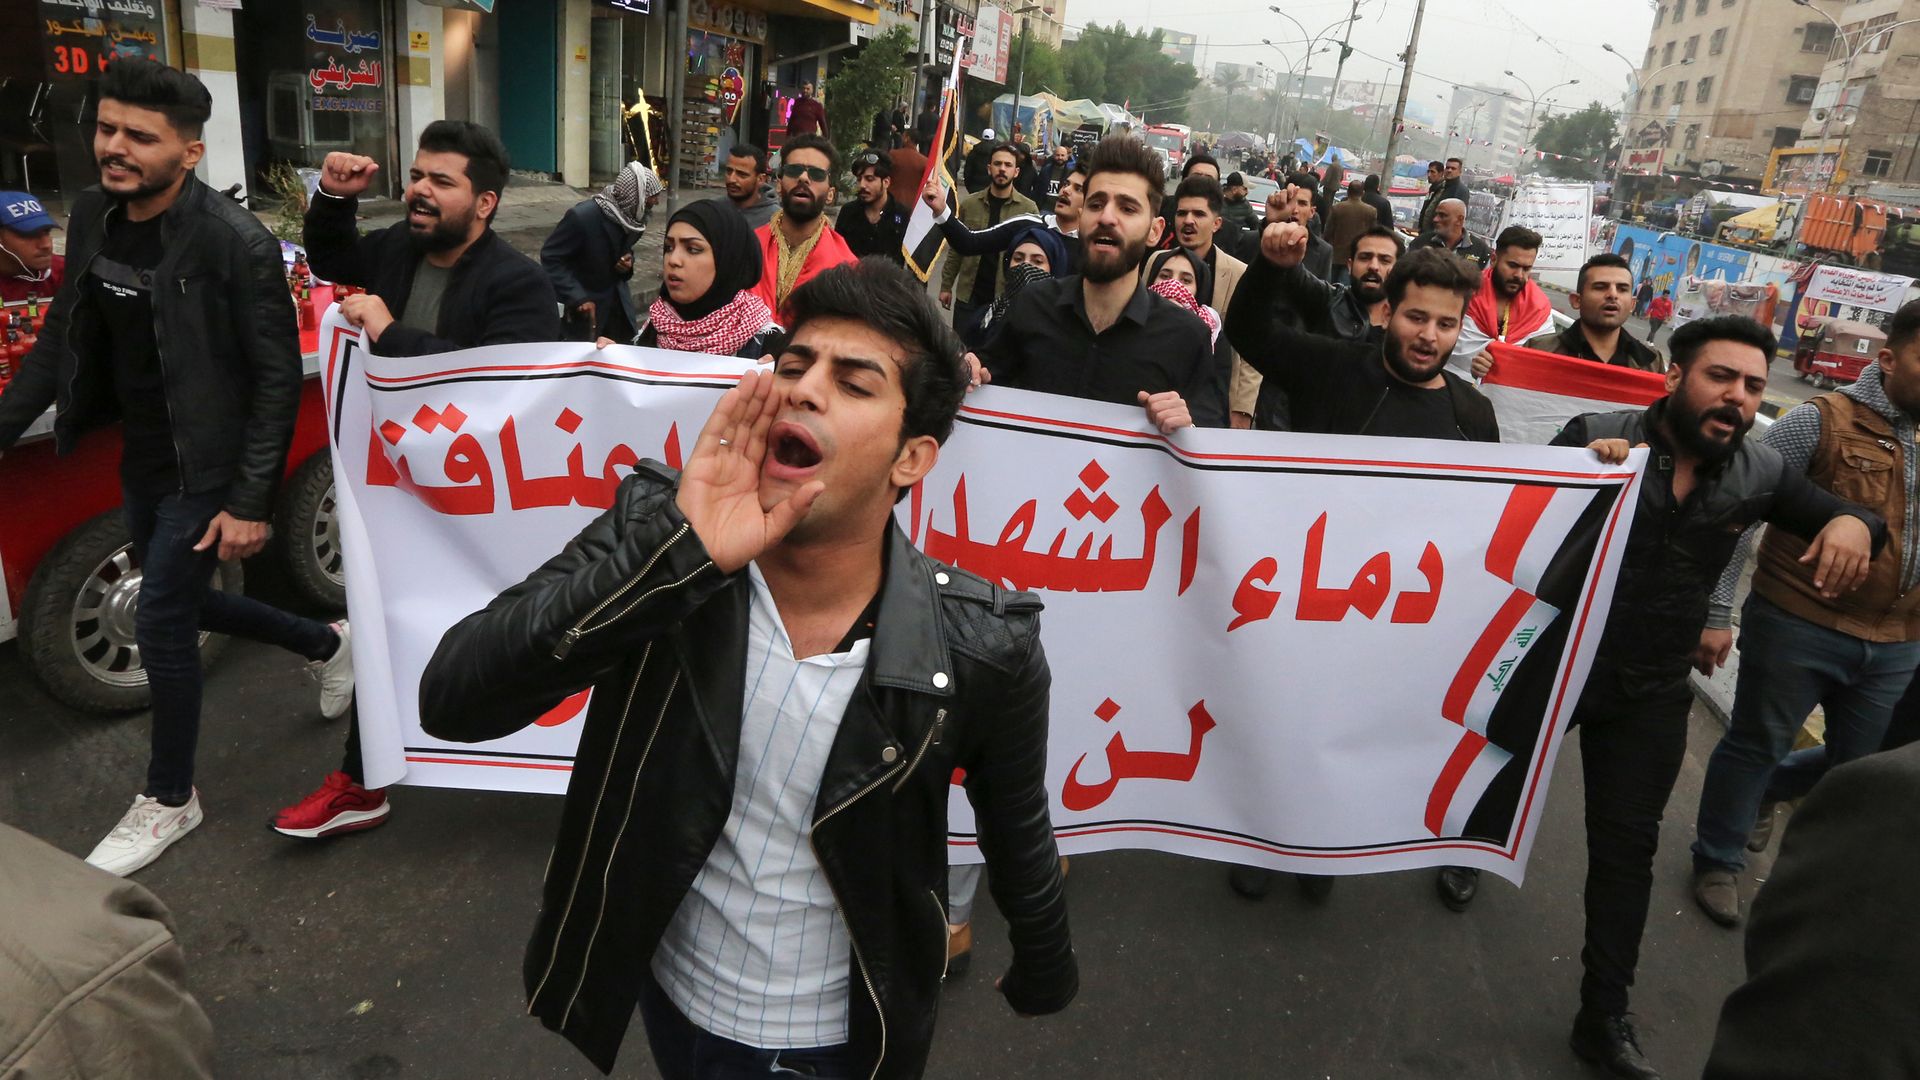 Iraqi protesters carry a banner which reads "The blood of martyrs is entrusted to us, it will not be in vain" during a march in Tahrir Square